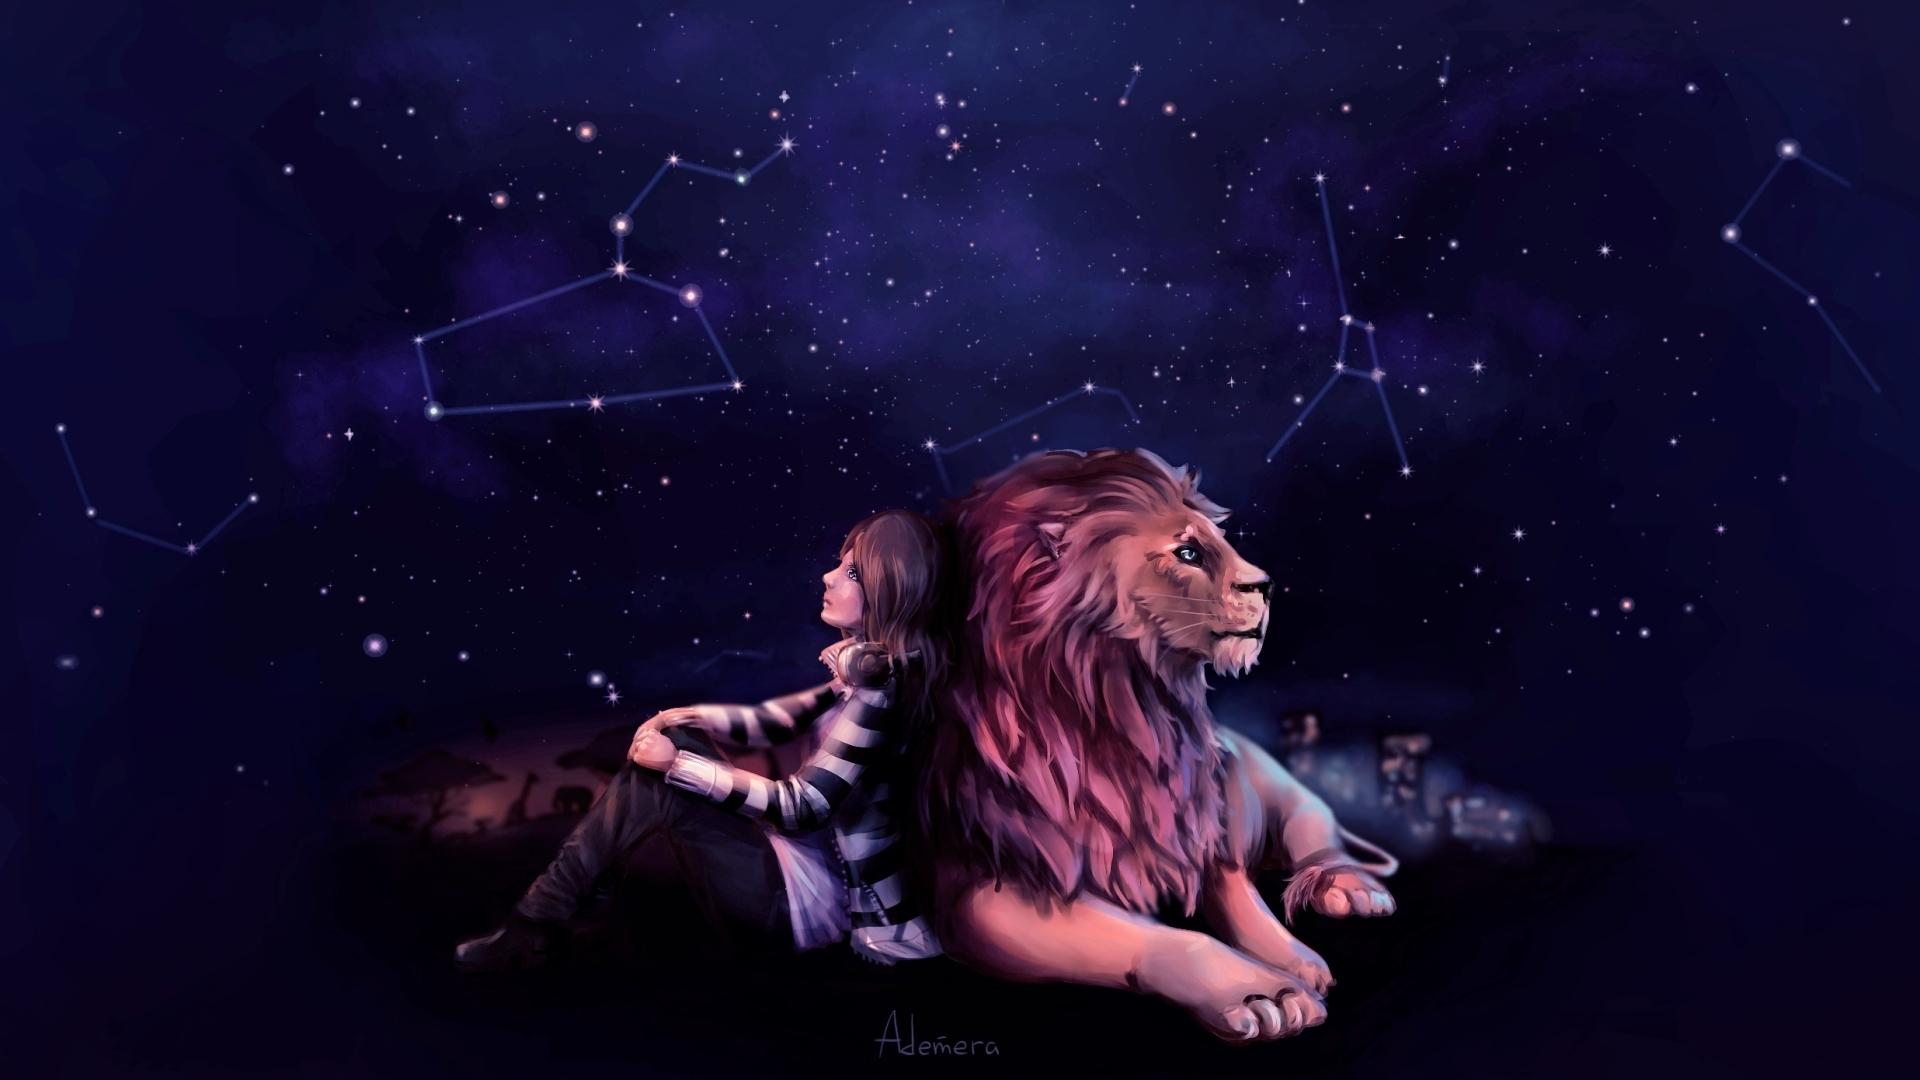 Girl Dreaming With Lion 1080P Laptop Full HD Wallpaper, HD